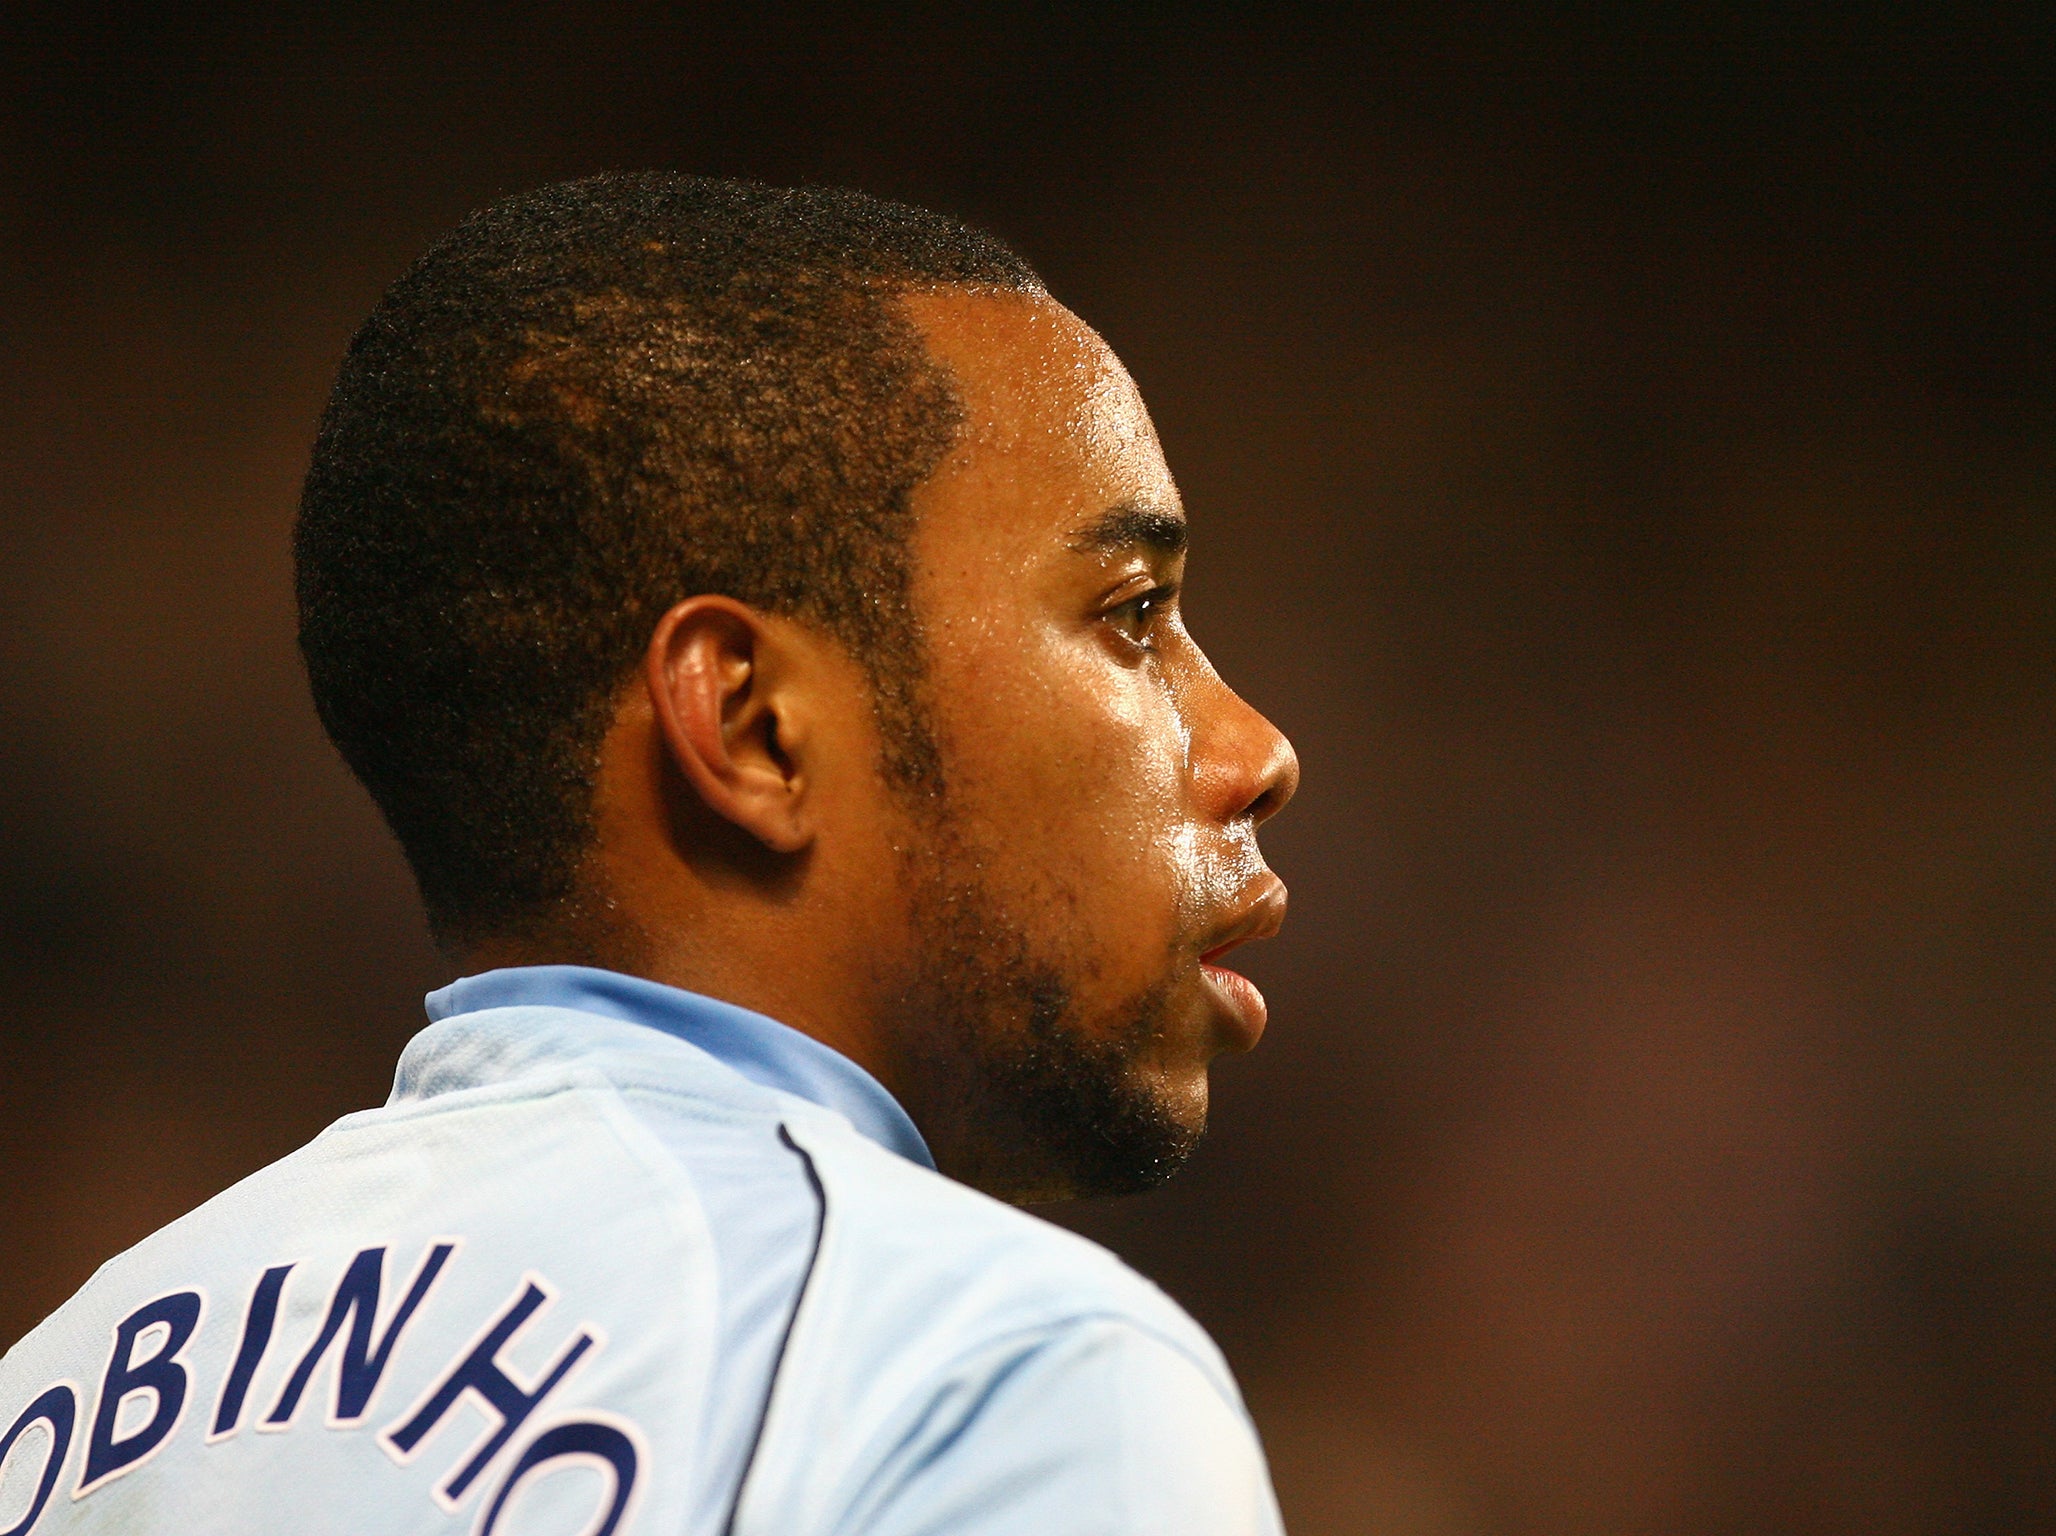 Robinho famously completed a late move to City